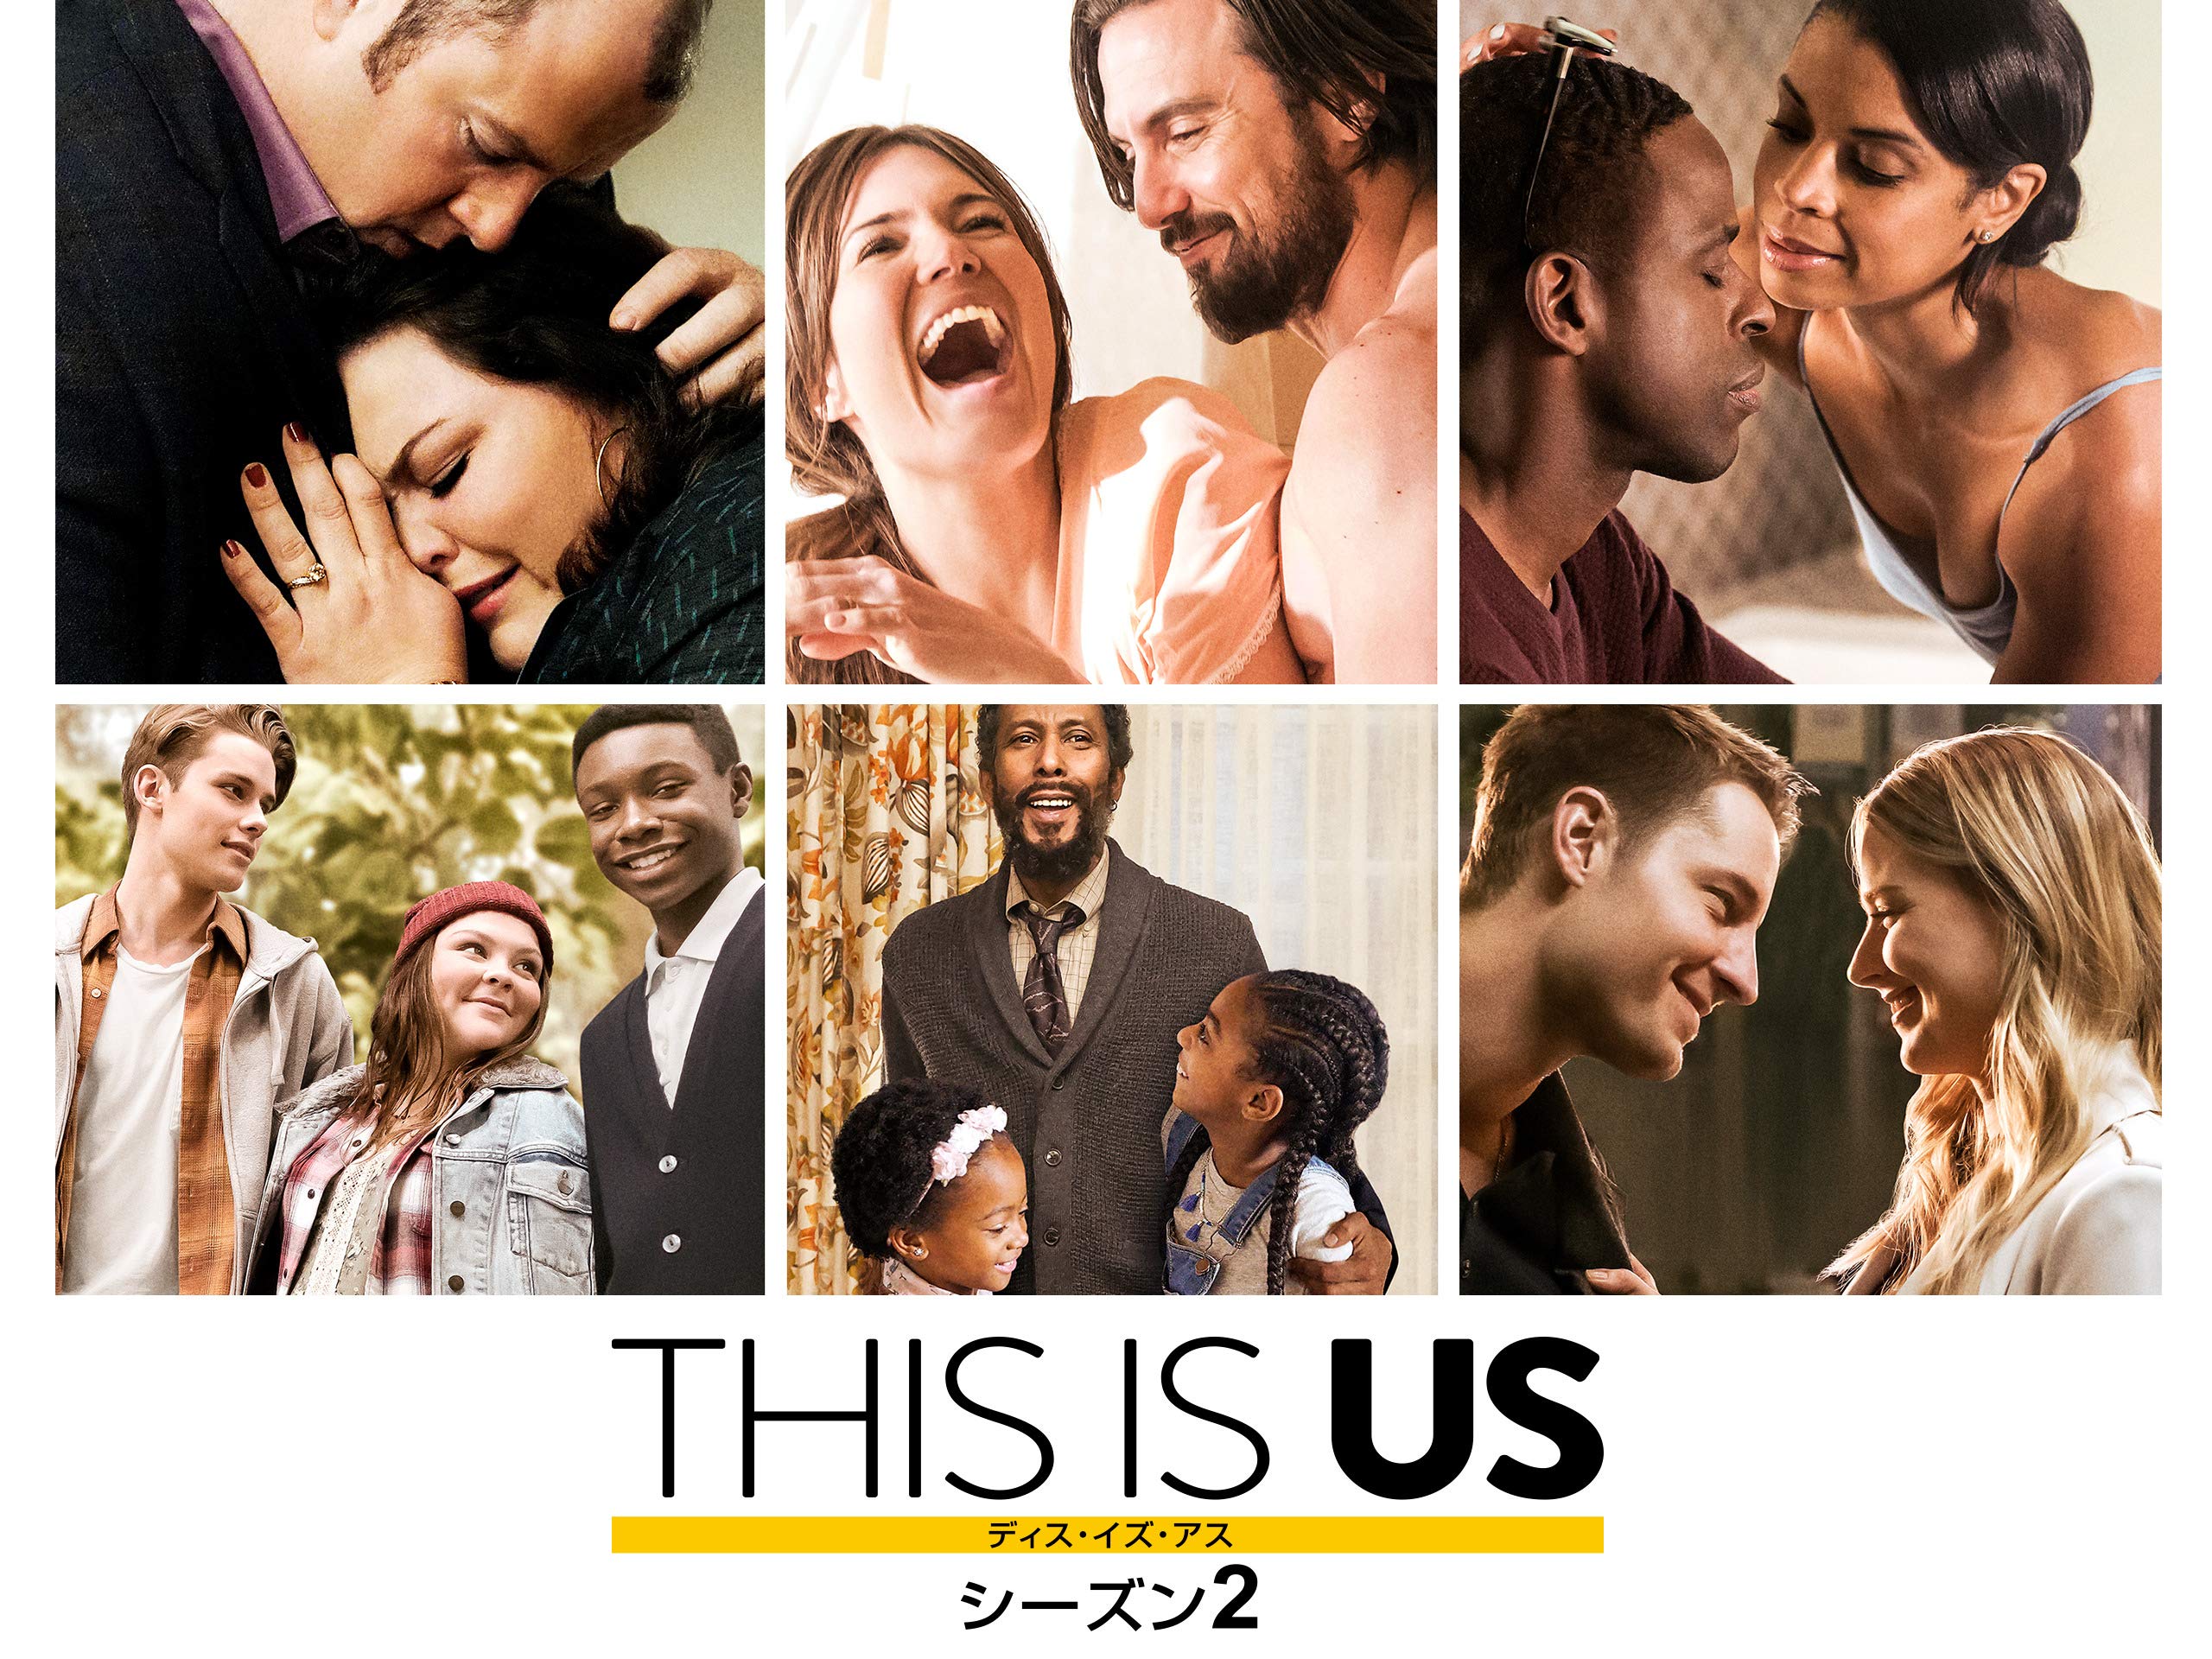 THIS IS US（ディス・イズ・アス）シーズン2の主題歌・人気曲・挿入歌まとめ